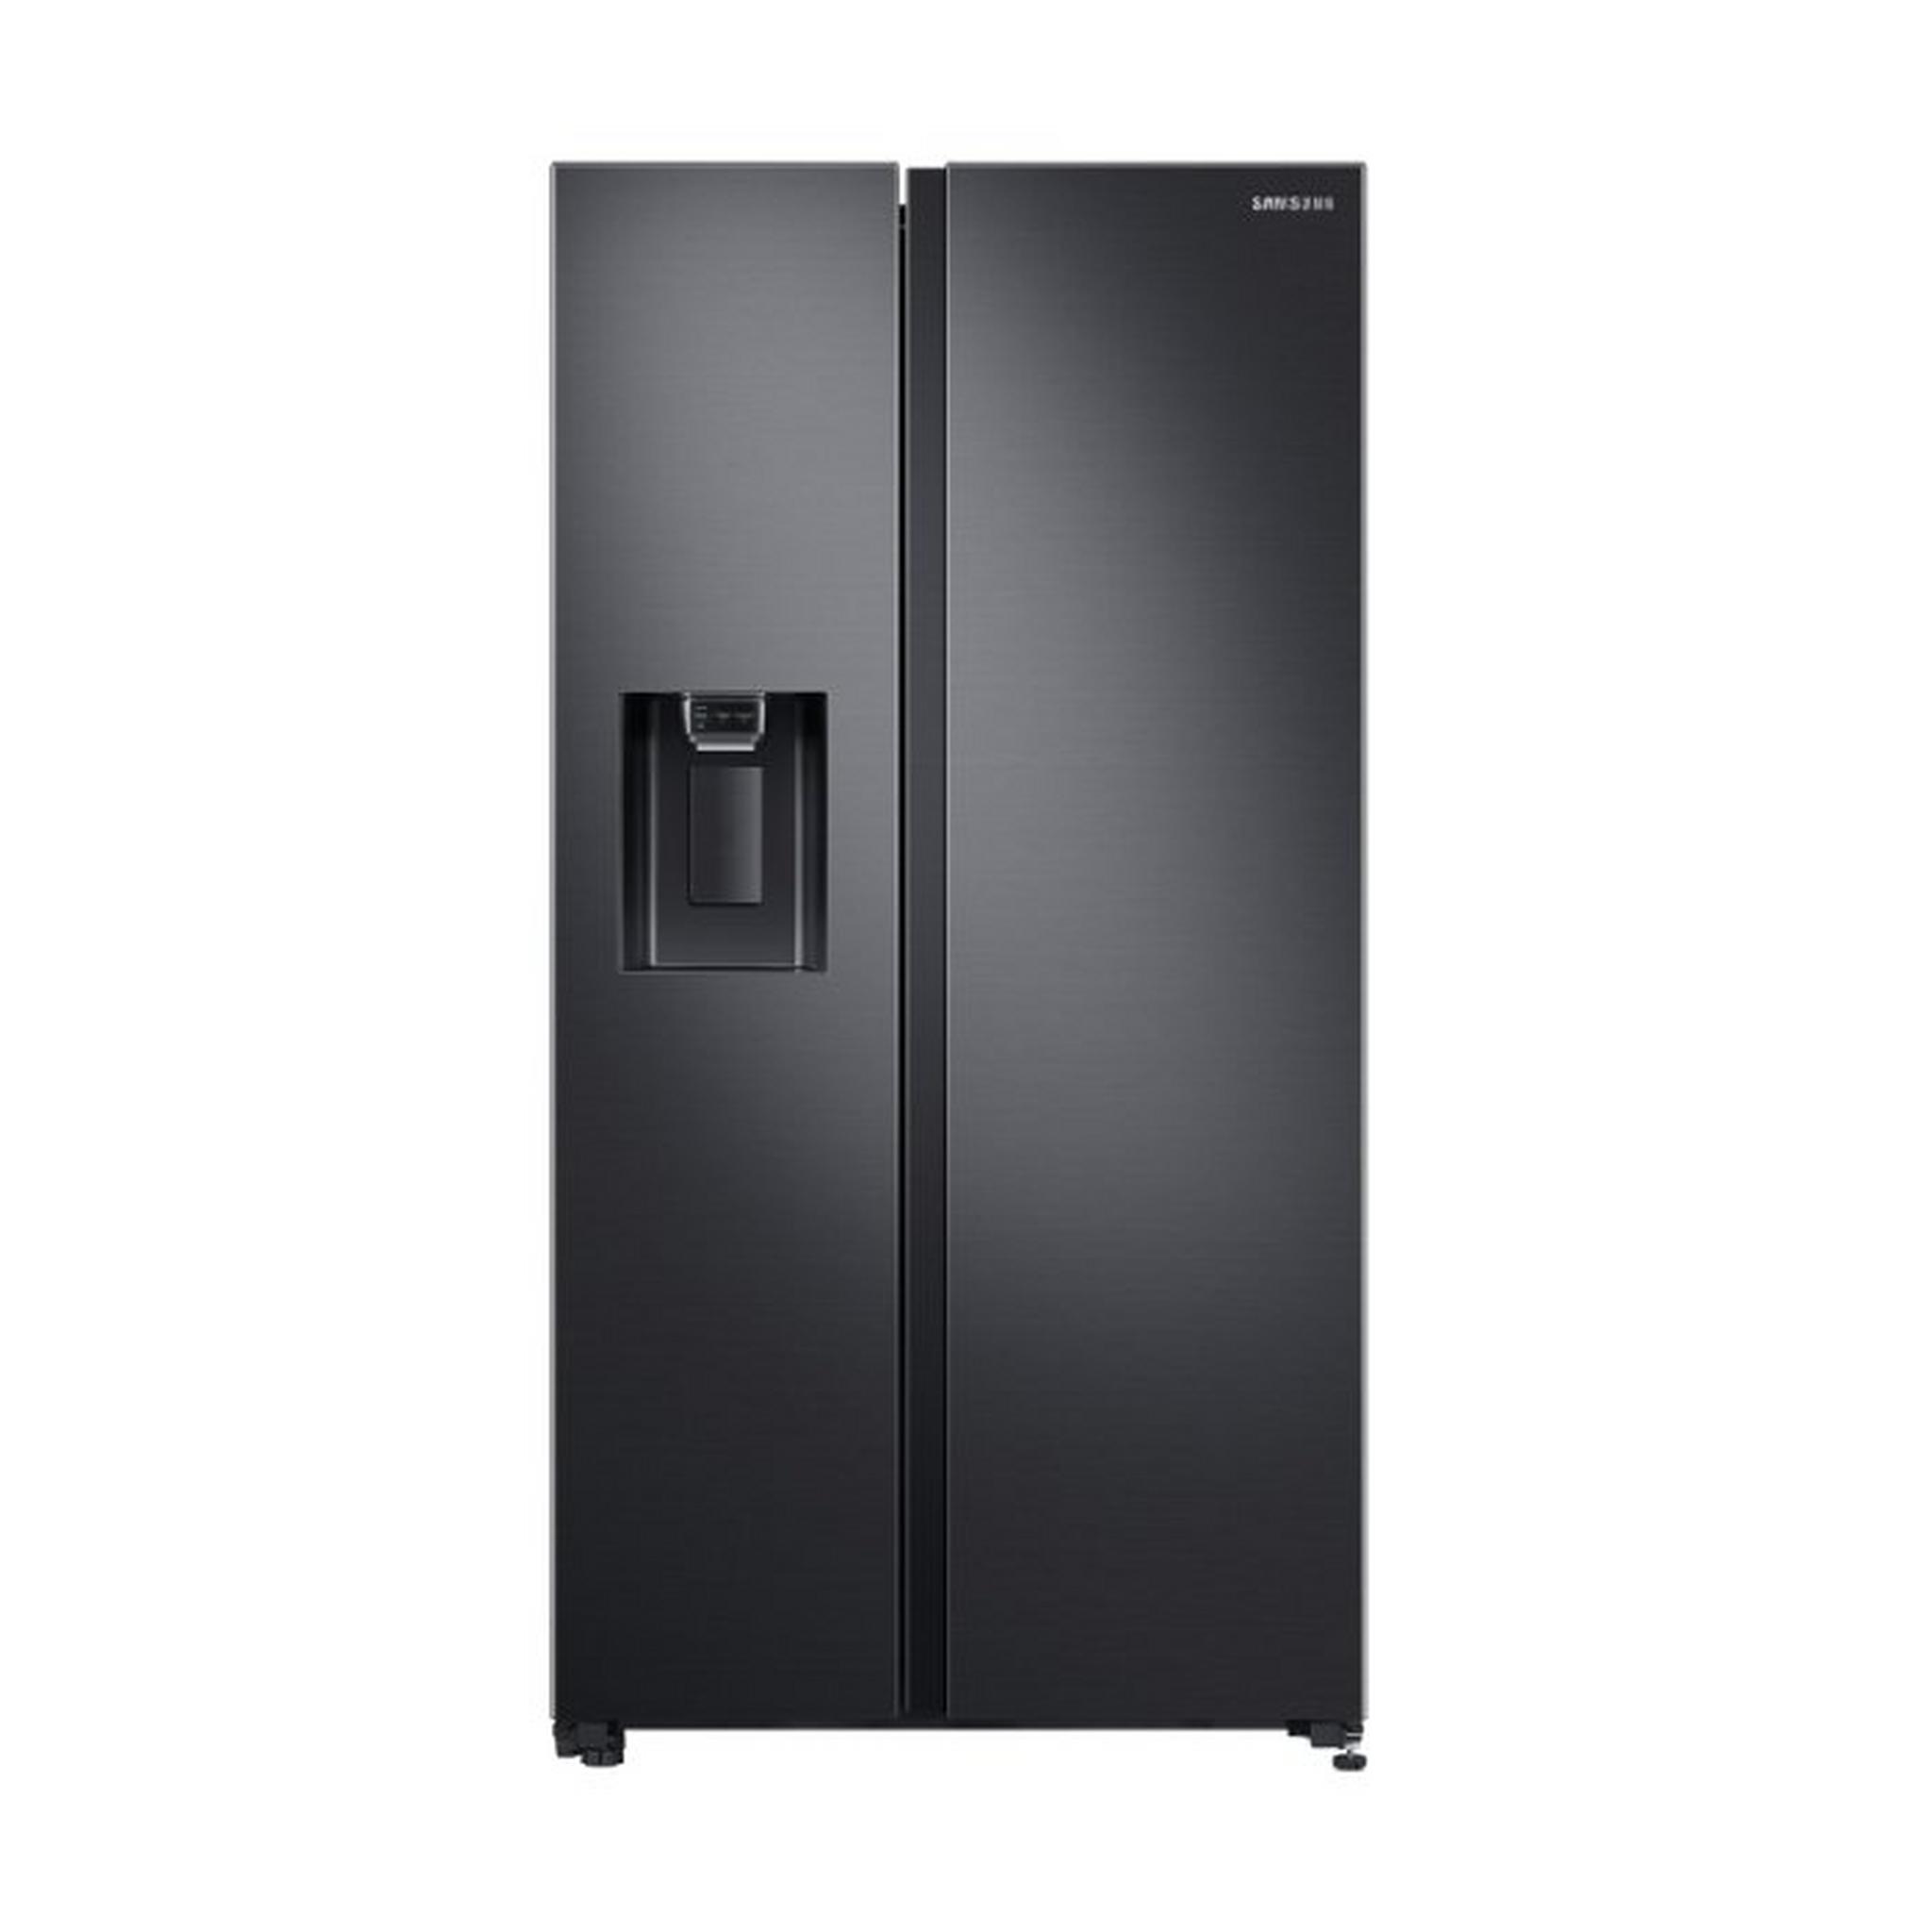 Samsung 23 CFT. Side By Side Refrigerator and Freezer - Black (RS64R5331B4/SG)